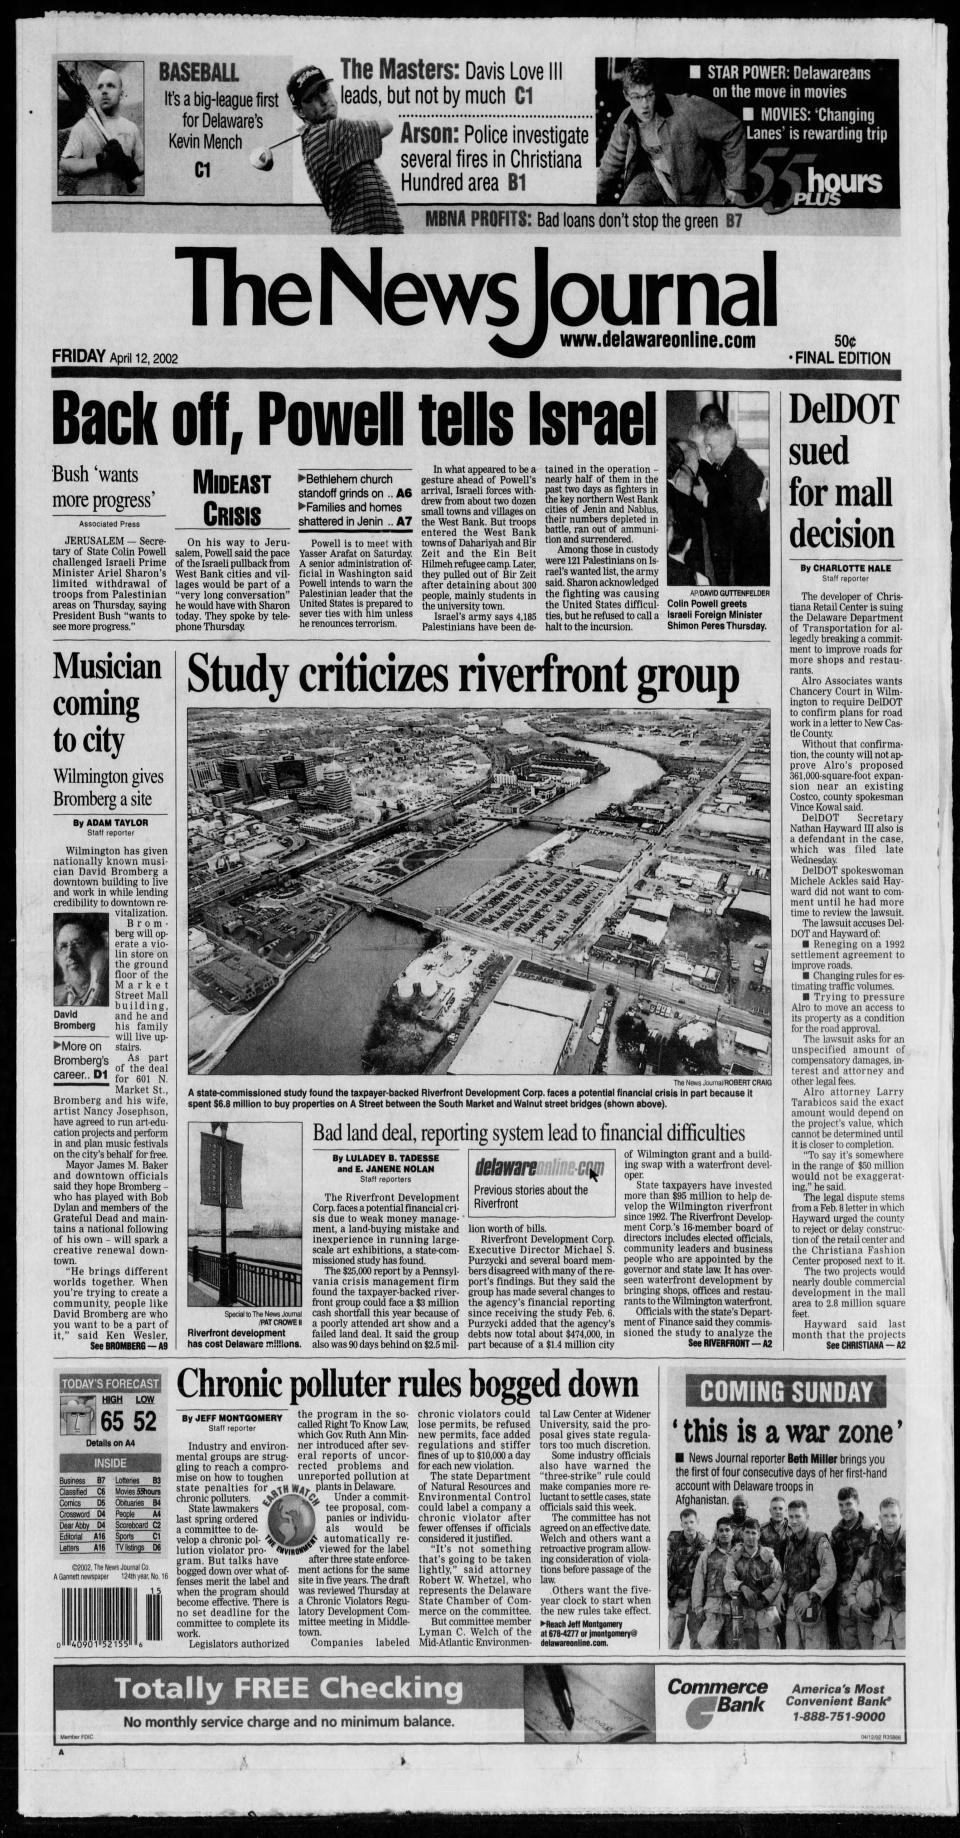 The deal to bring musician David Bromberg and his artist wife Nancy Josephson to Wilmington was front page news in The News Journal in April 2002.